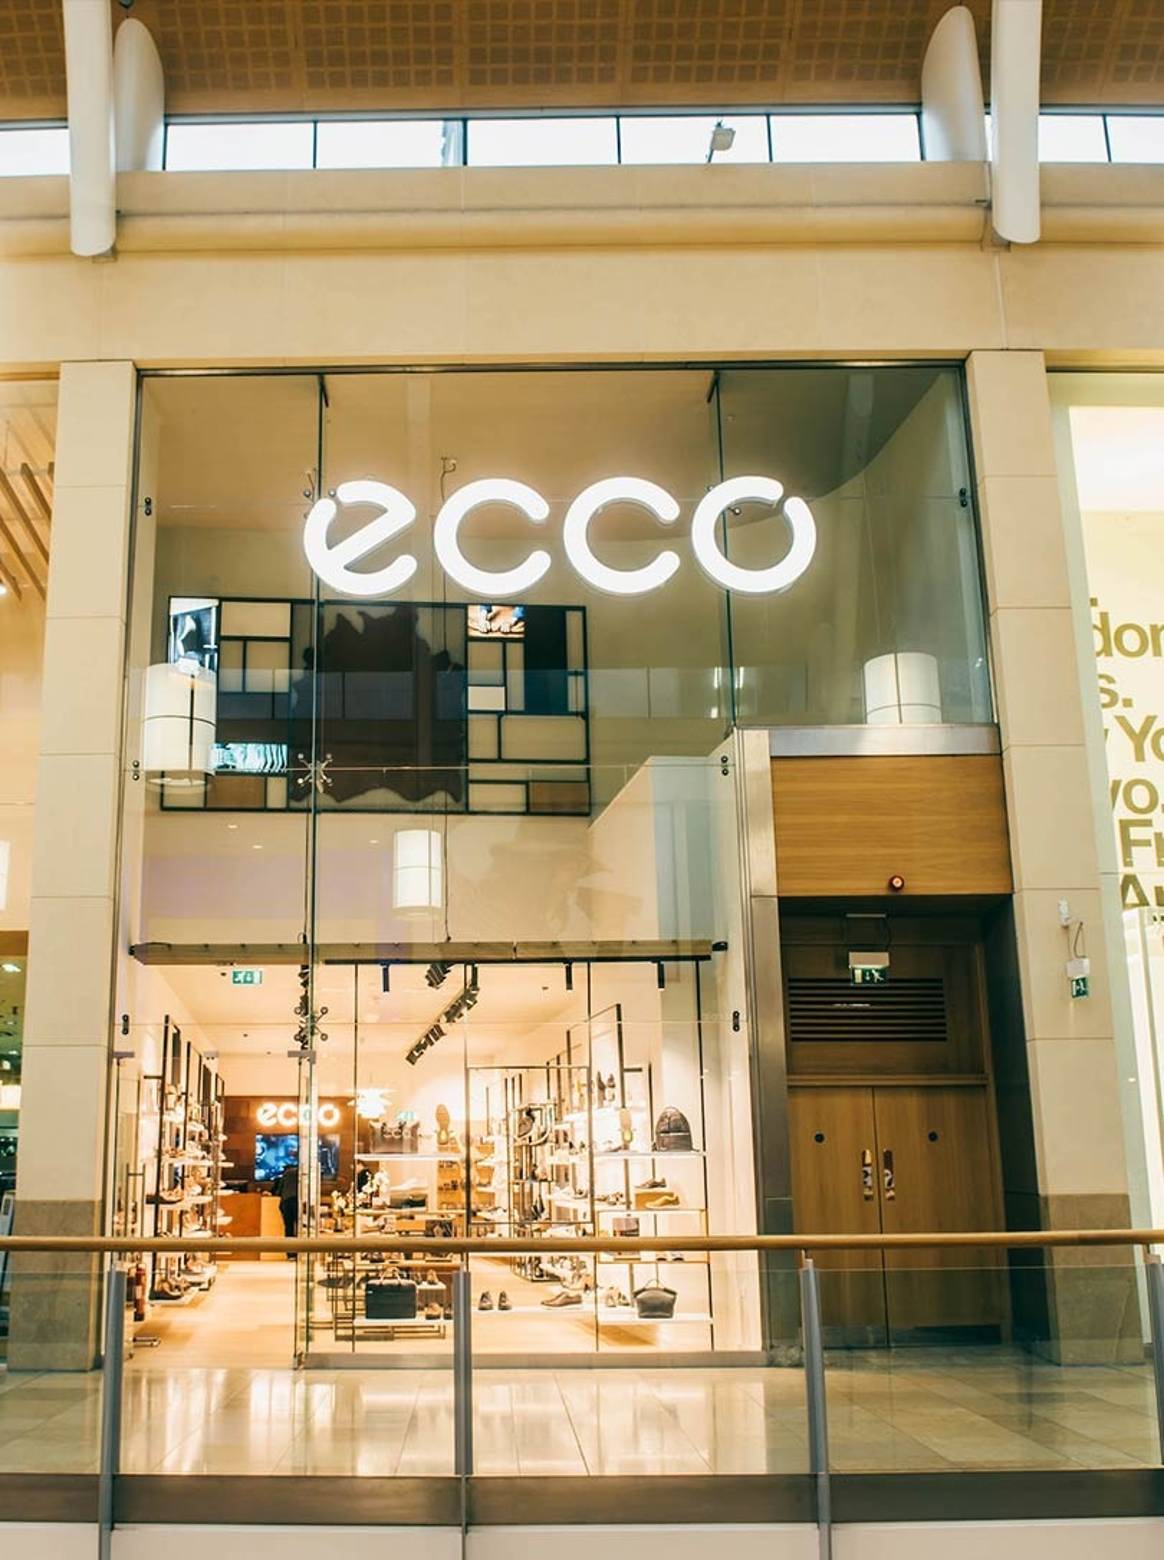 Ecco relocates to larger space at St David's